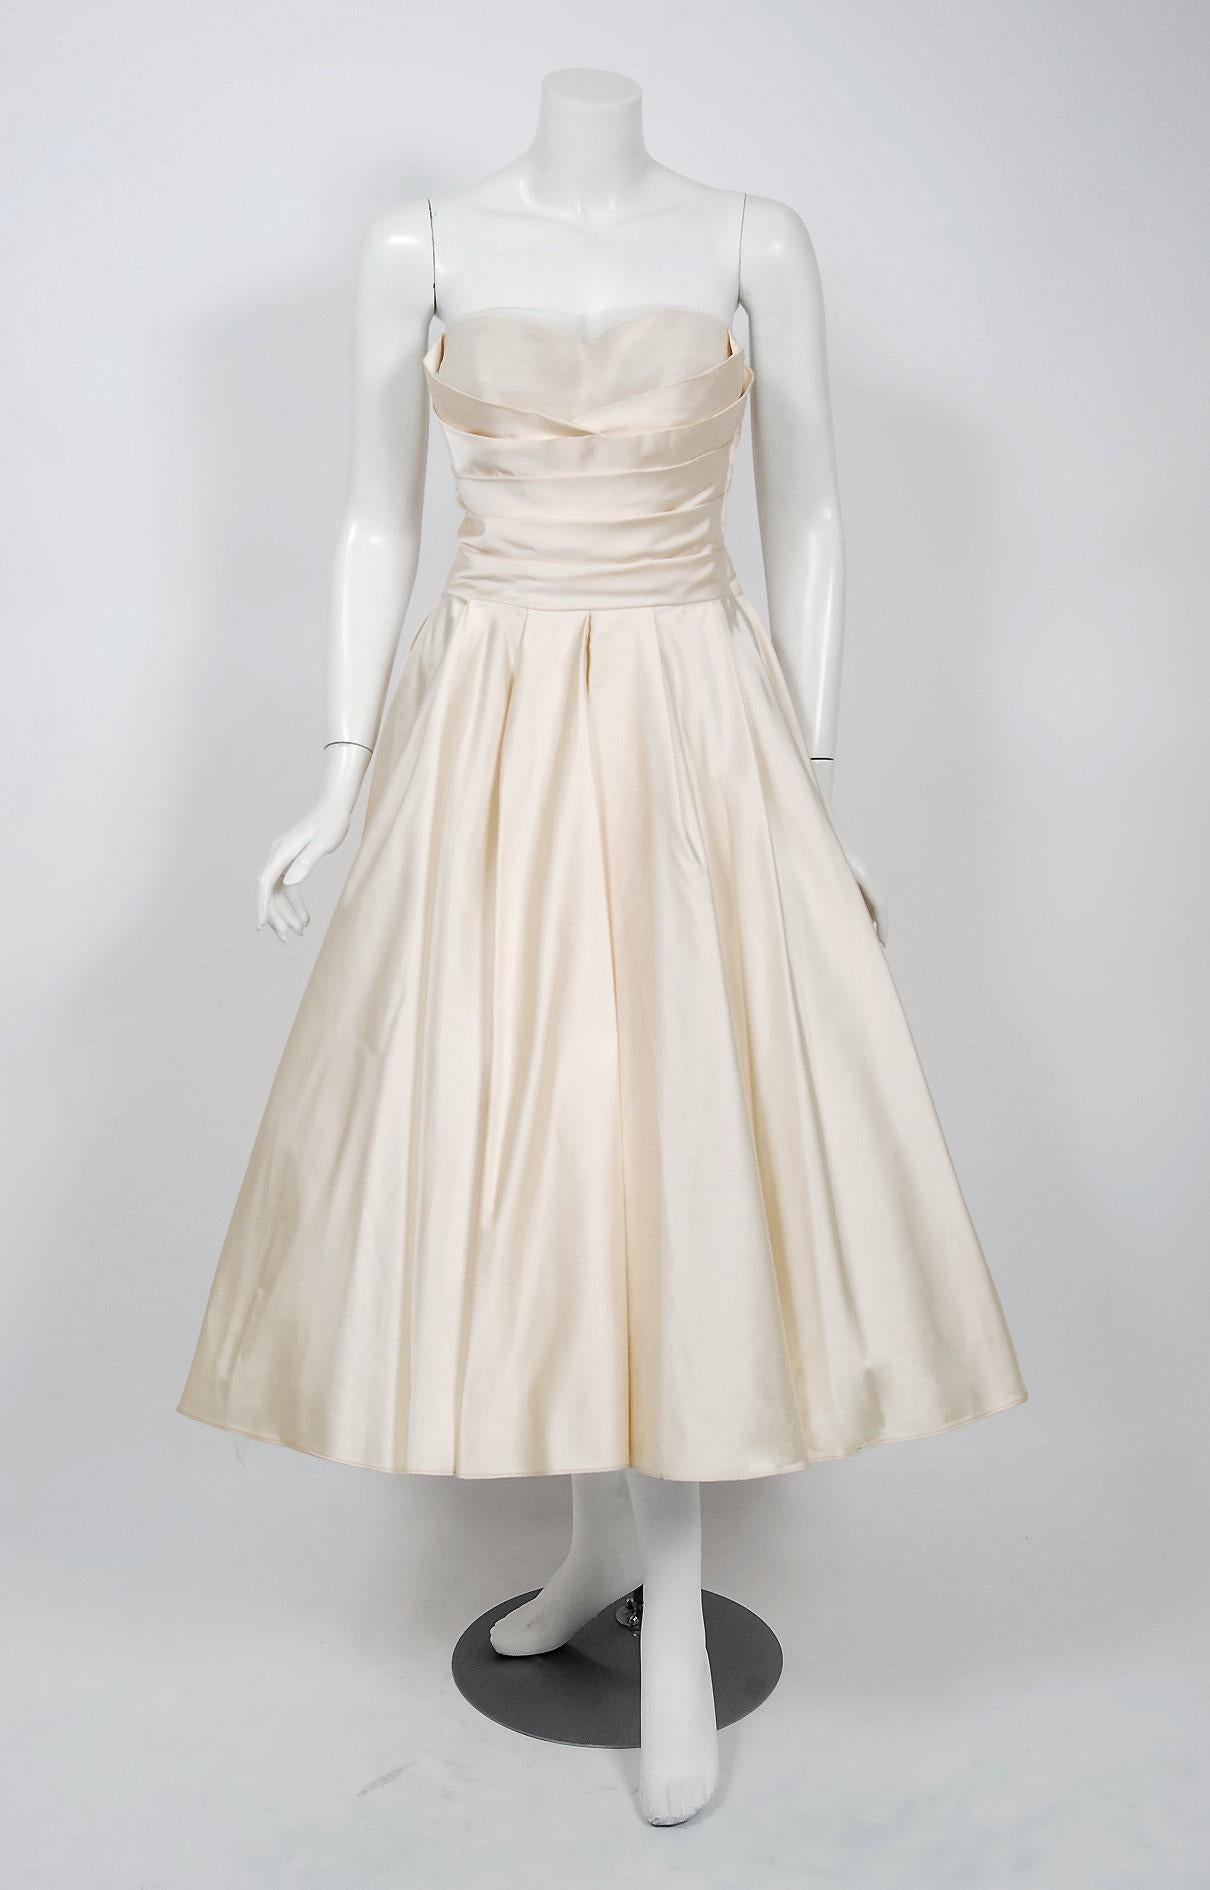 Women's 1950's Fred Perlberg Ivory Satin Ruched Sweetheart Circle-Skirt Dress w/ Tags